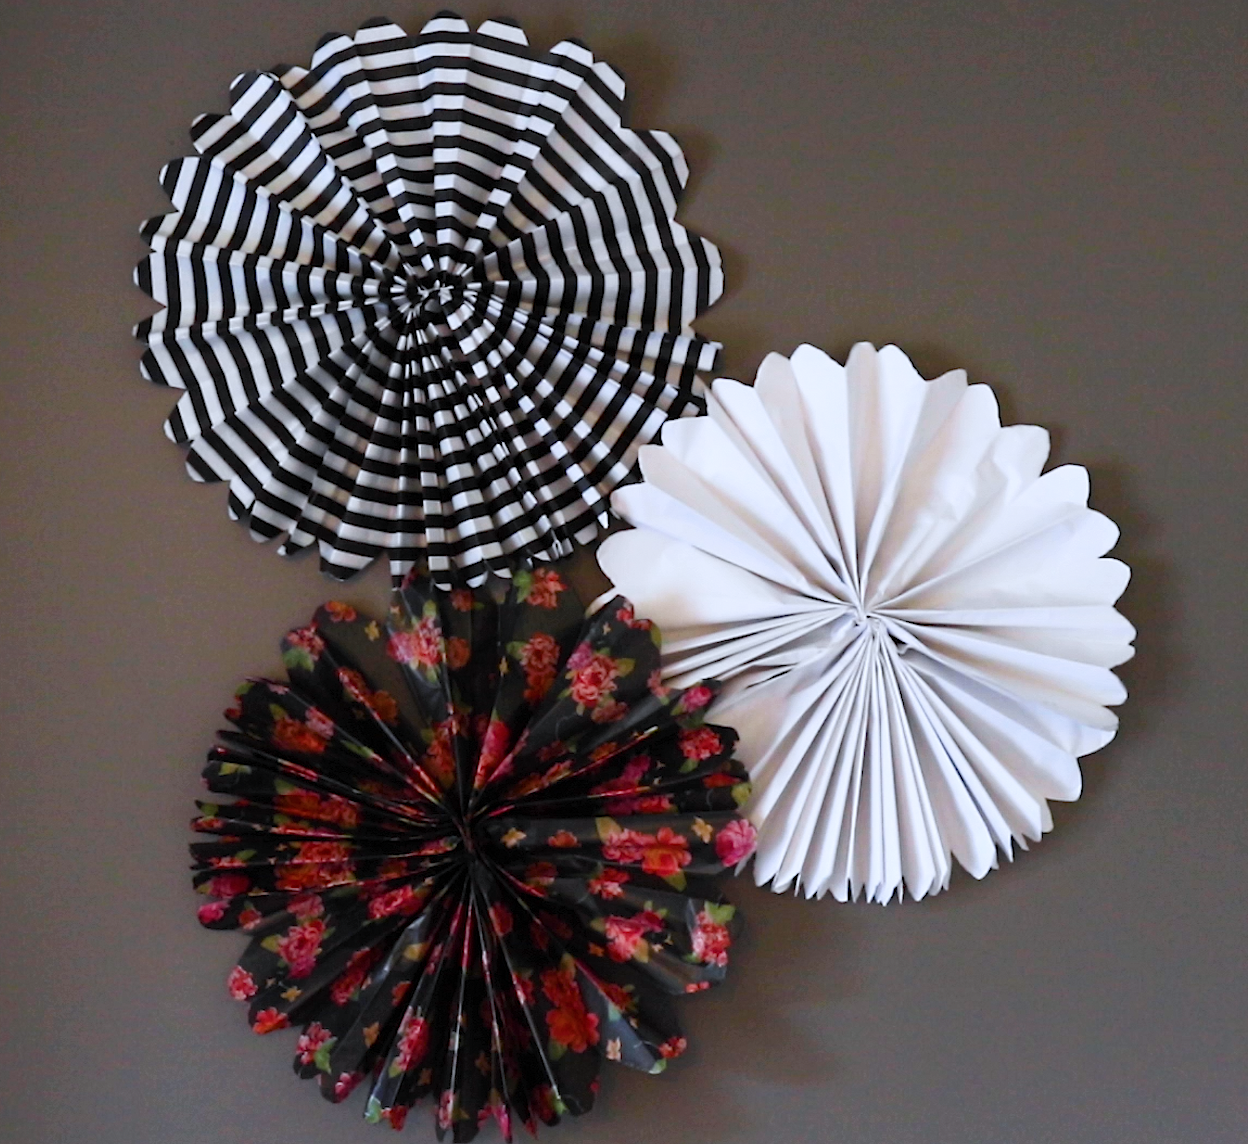 DIY Paper Fan Decorations. DIY Paper Rosettes instructions (how to make paper rosettes)